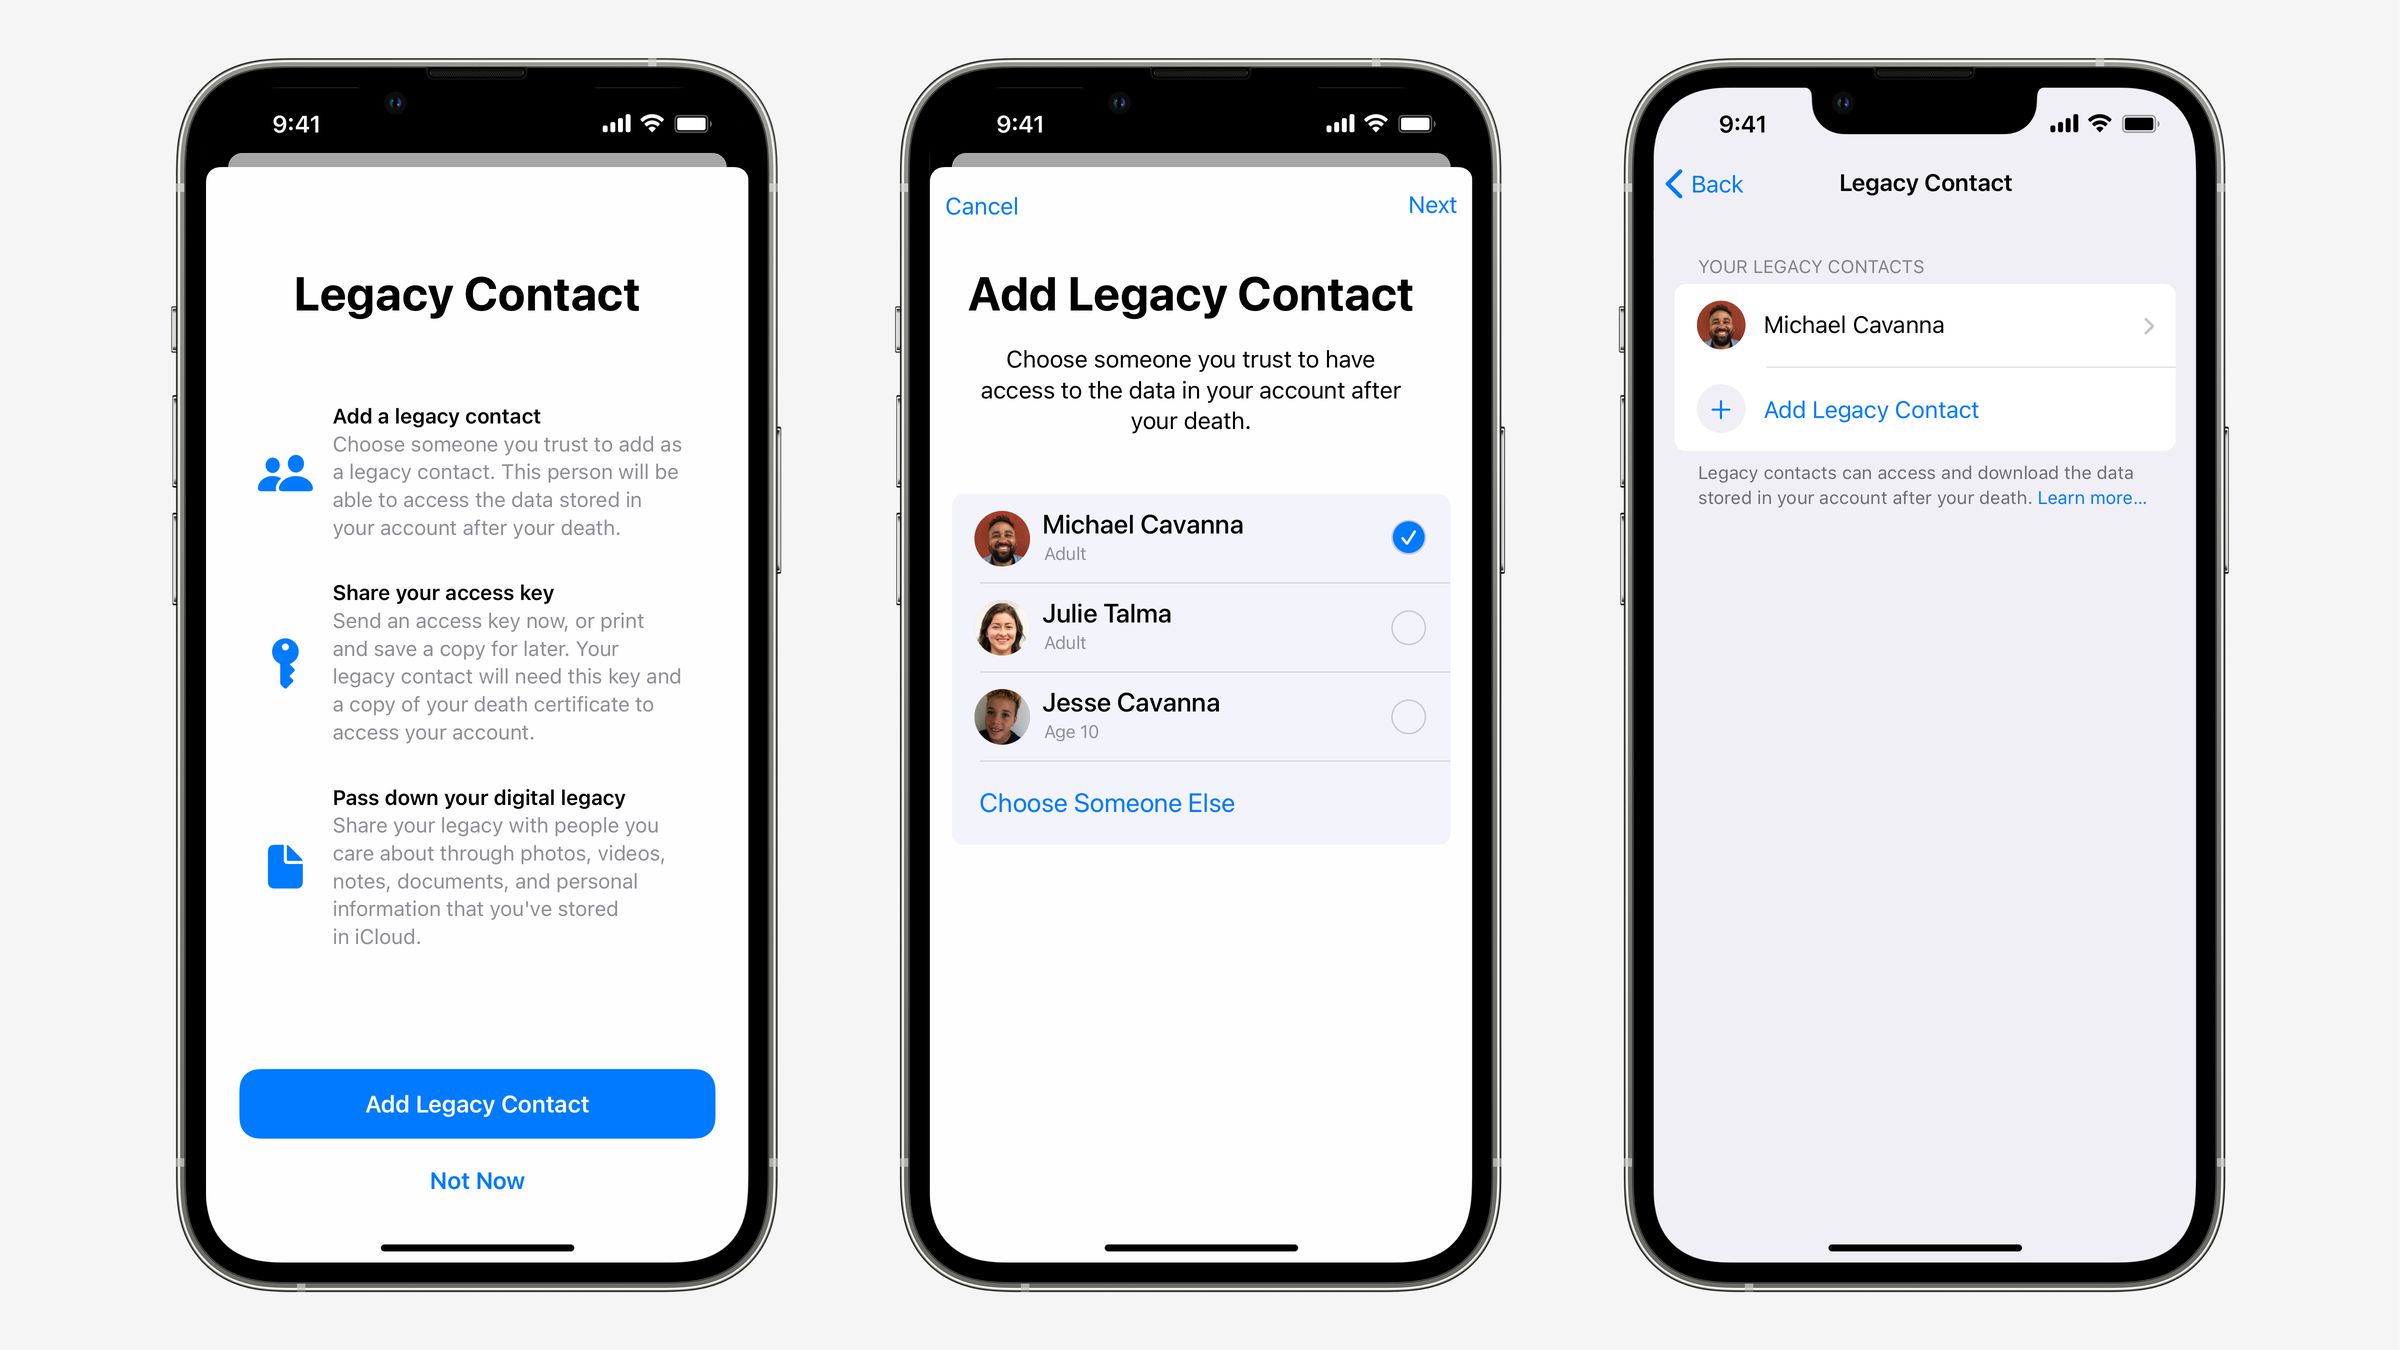 You can set up your Legacy Contacts in Settings on an iPhone, iPad, or Mac computer